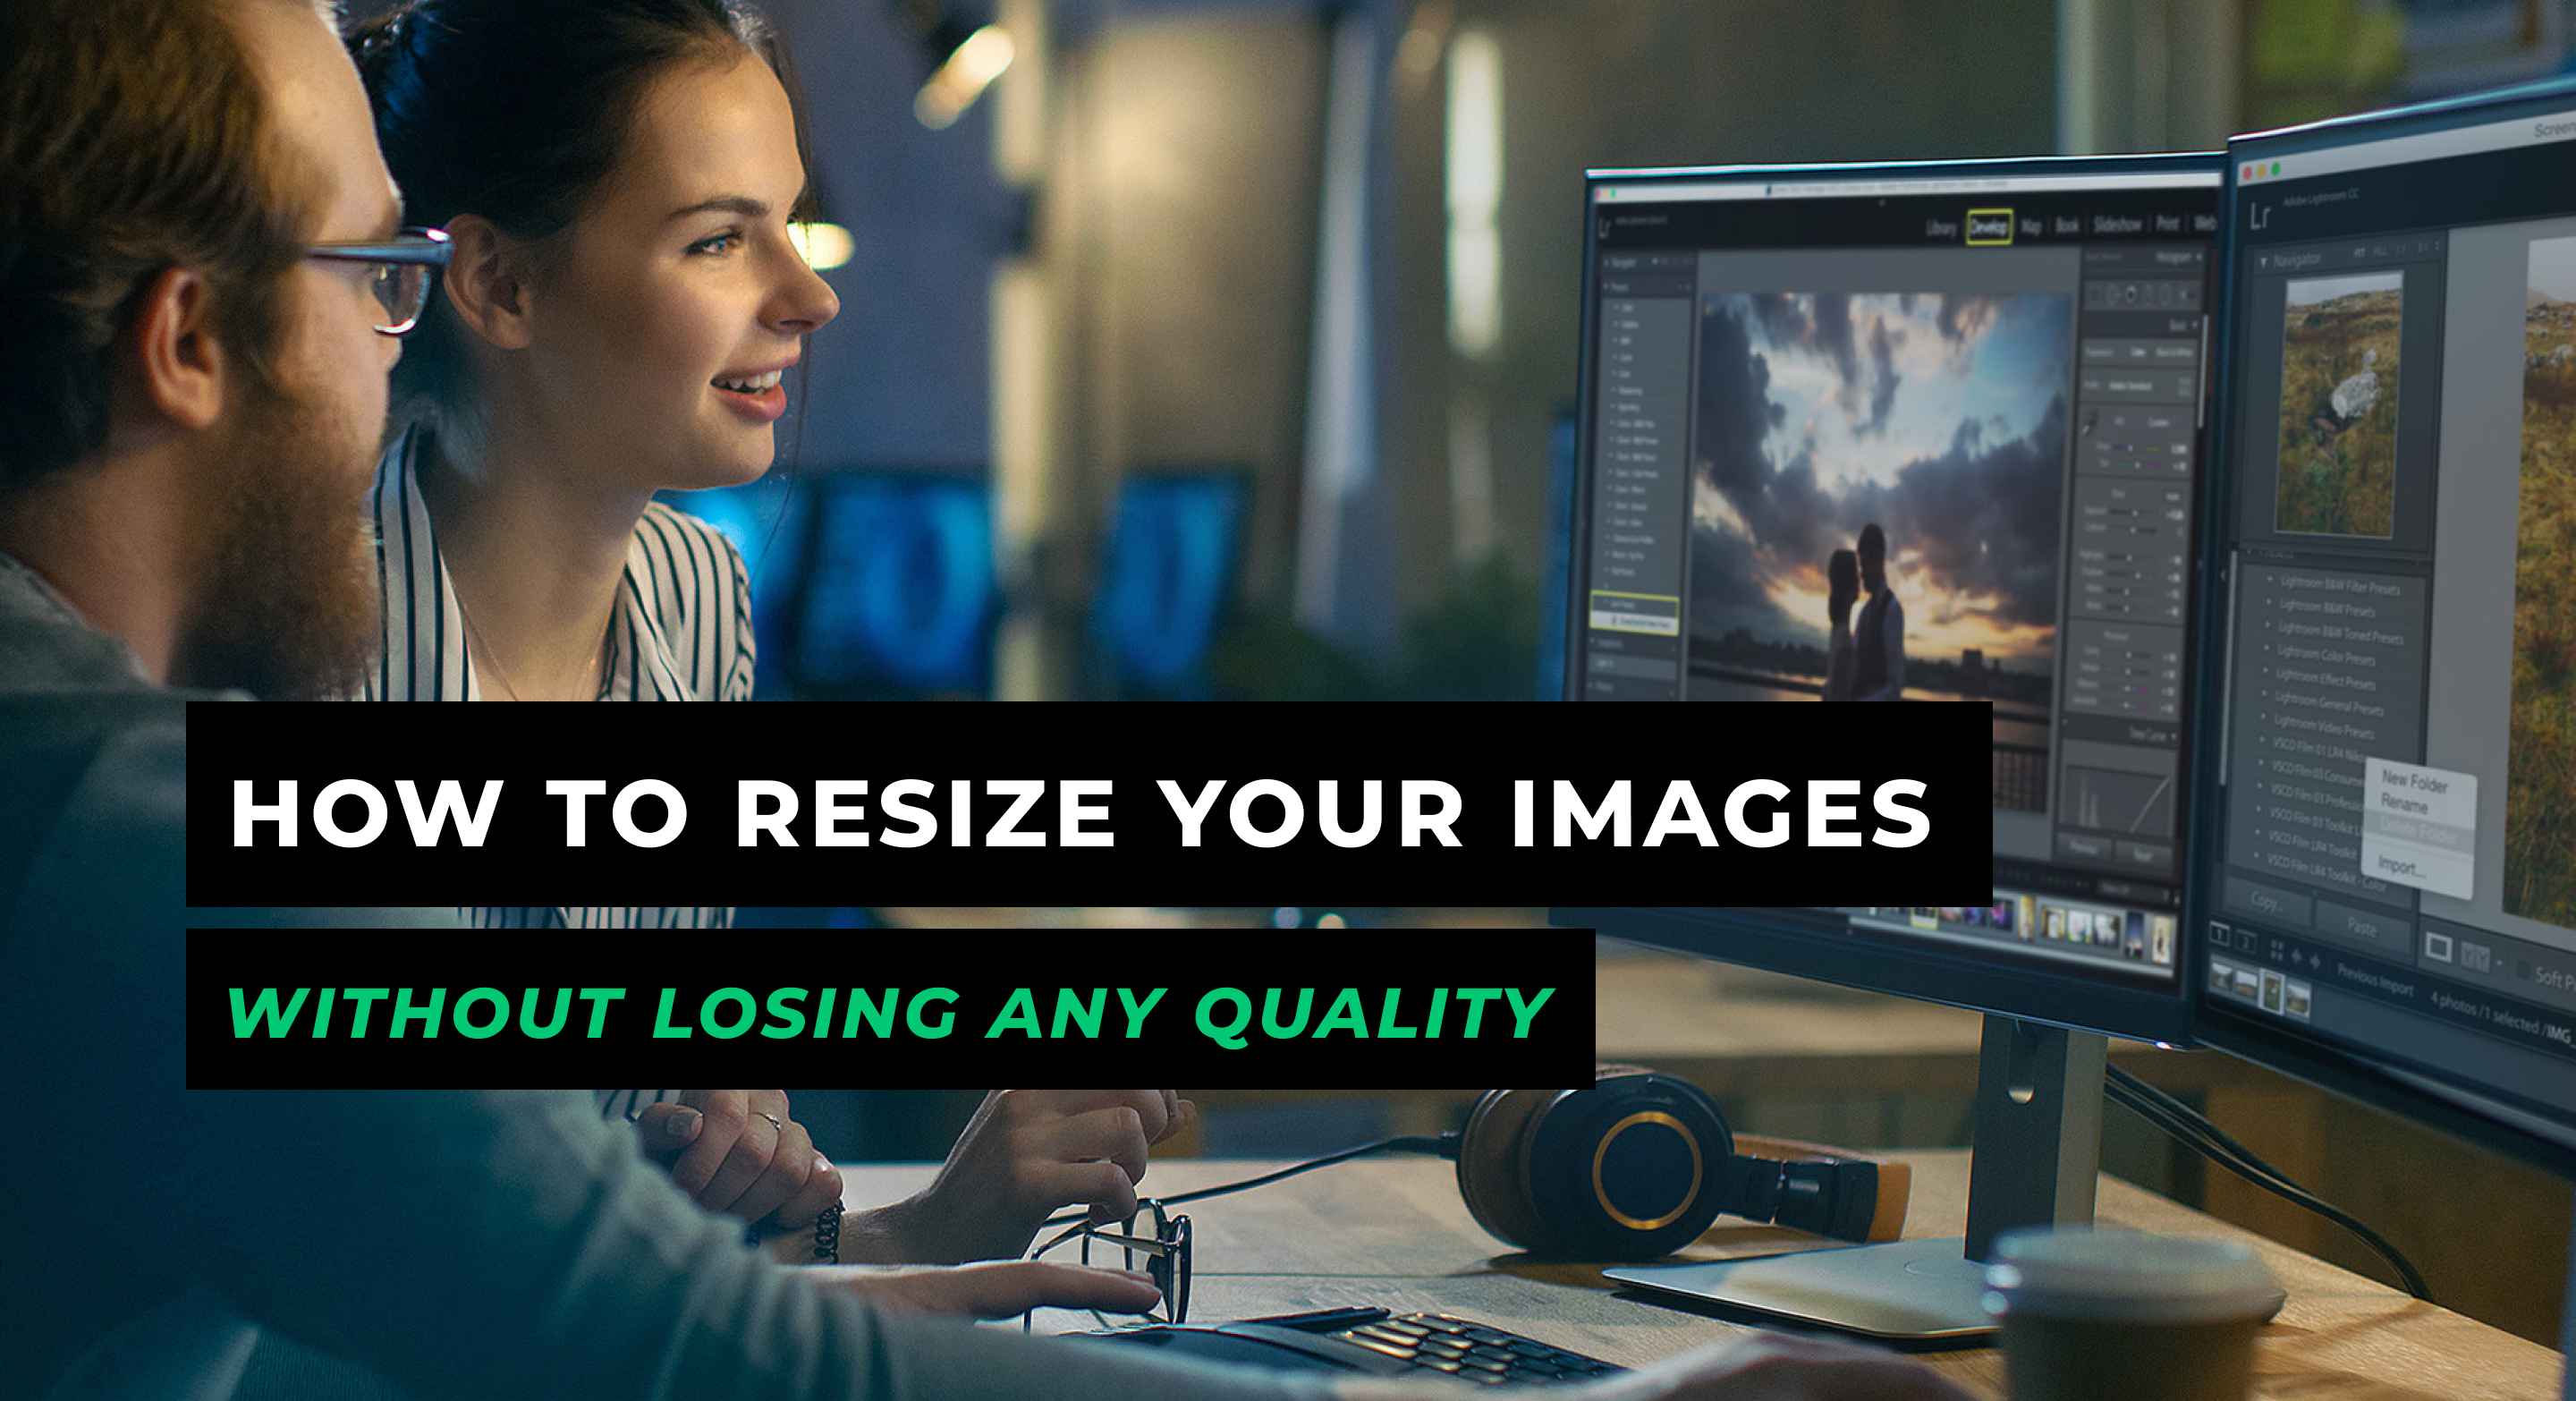 image resize without losing quality